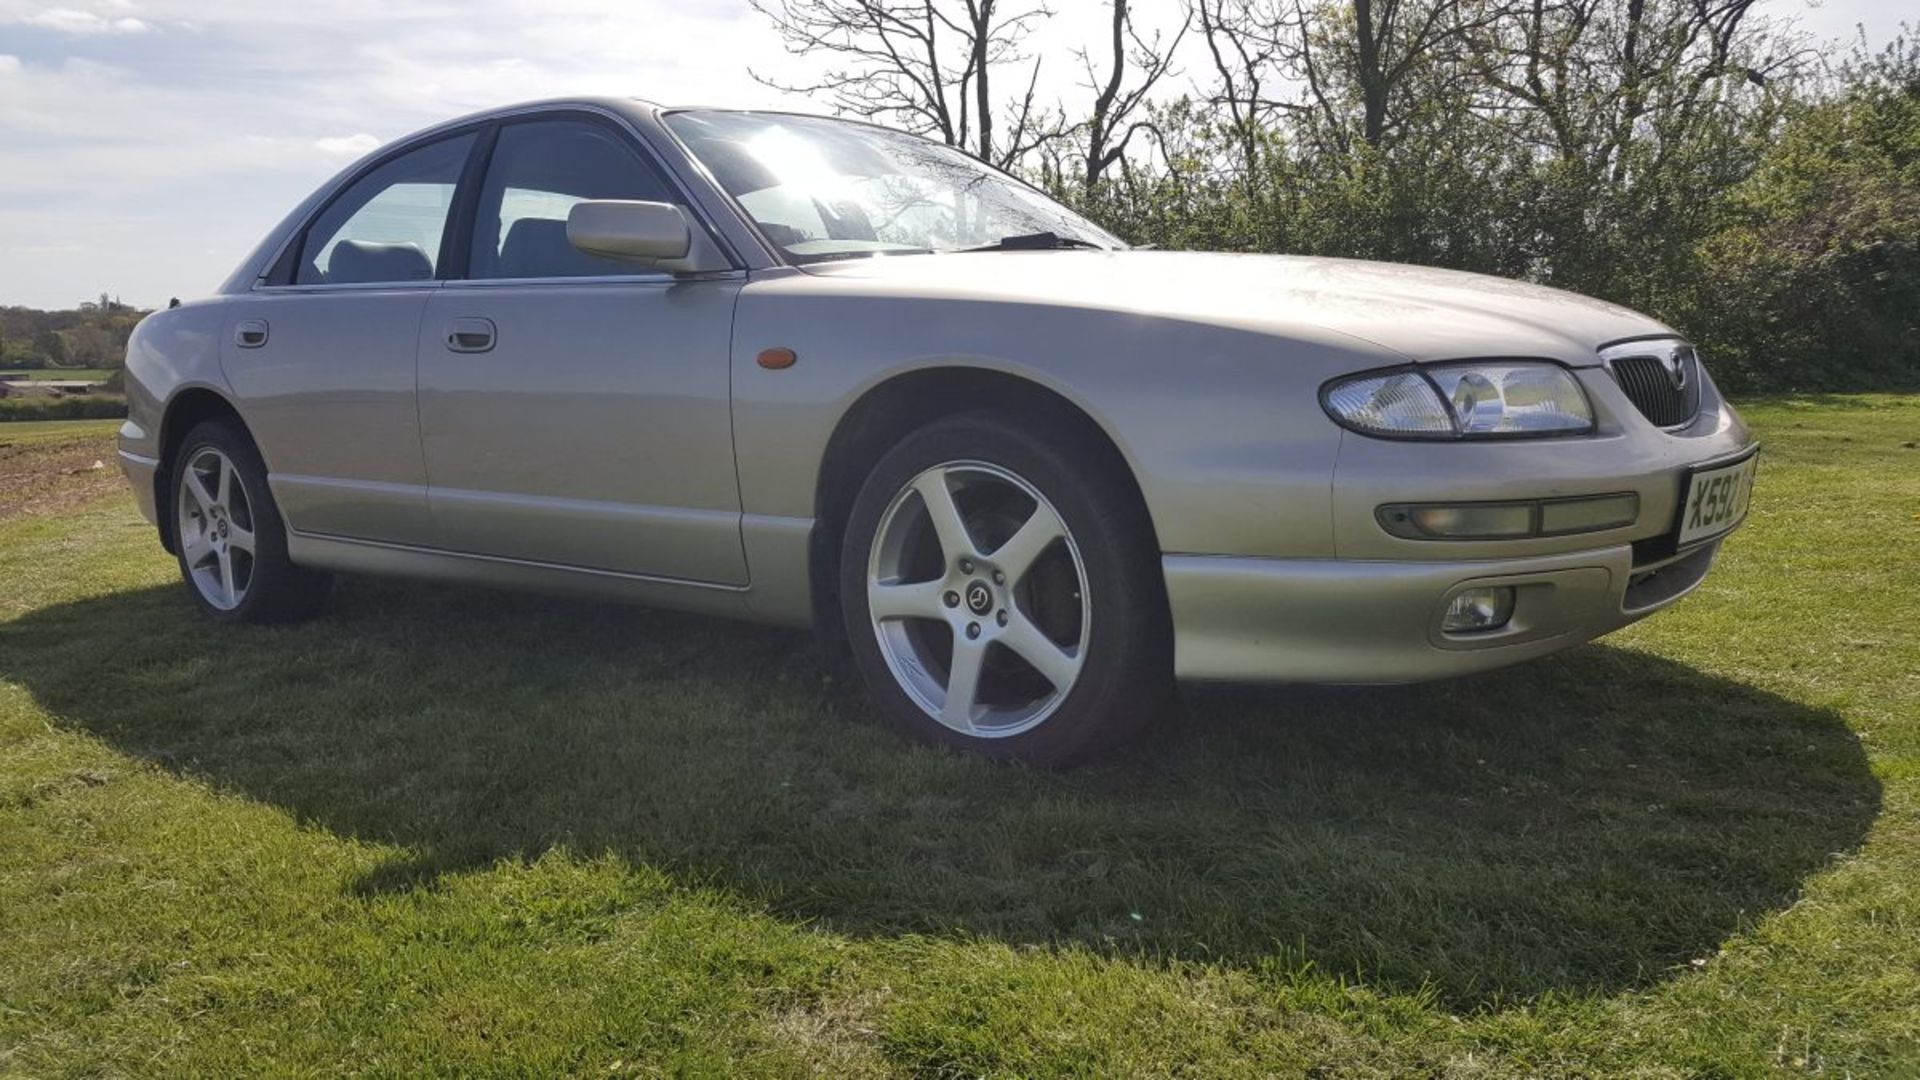 Mazda Xedos 9 “Miller” 2000 - This next car from t